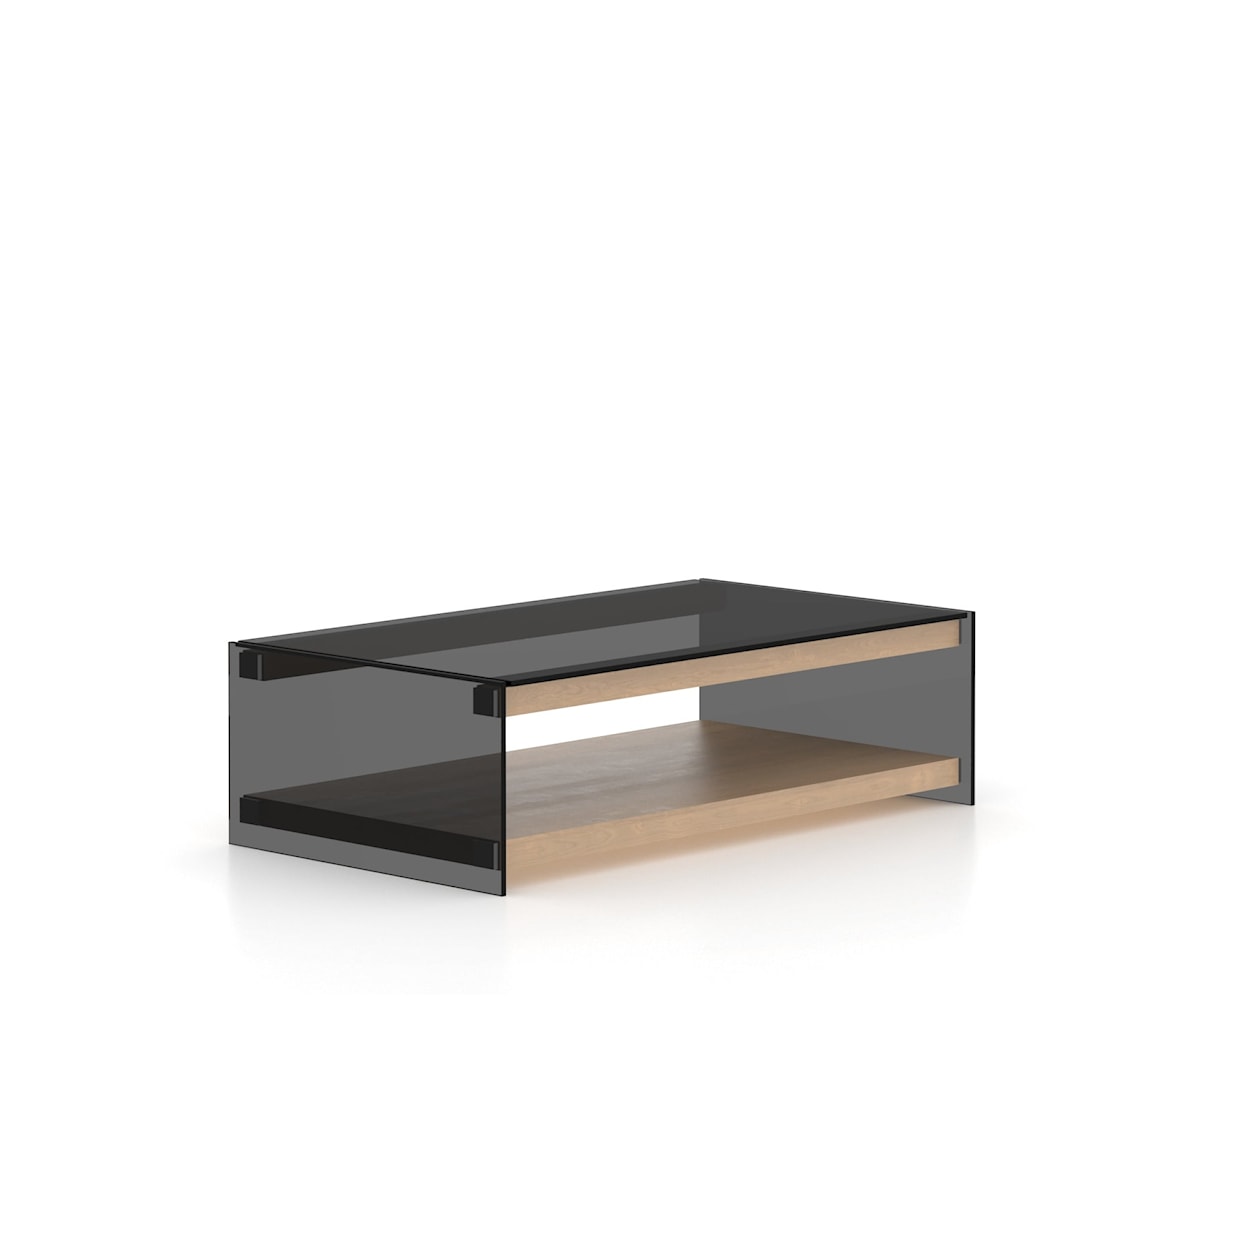 Canadel Accent Fiction Rectangular Coffee Table